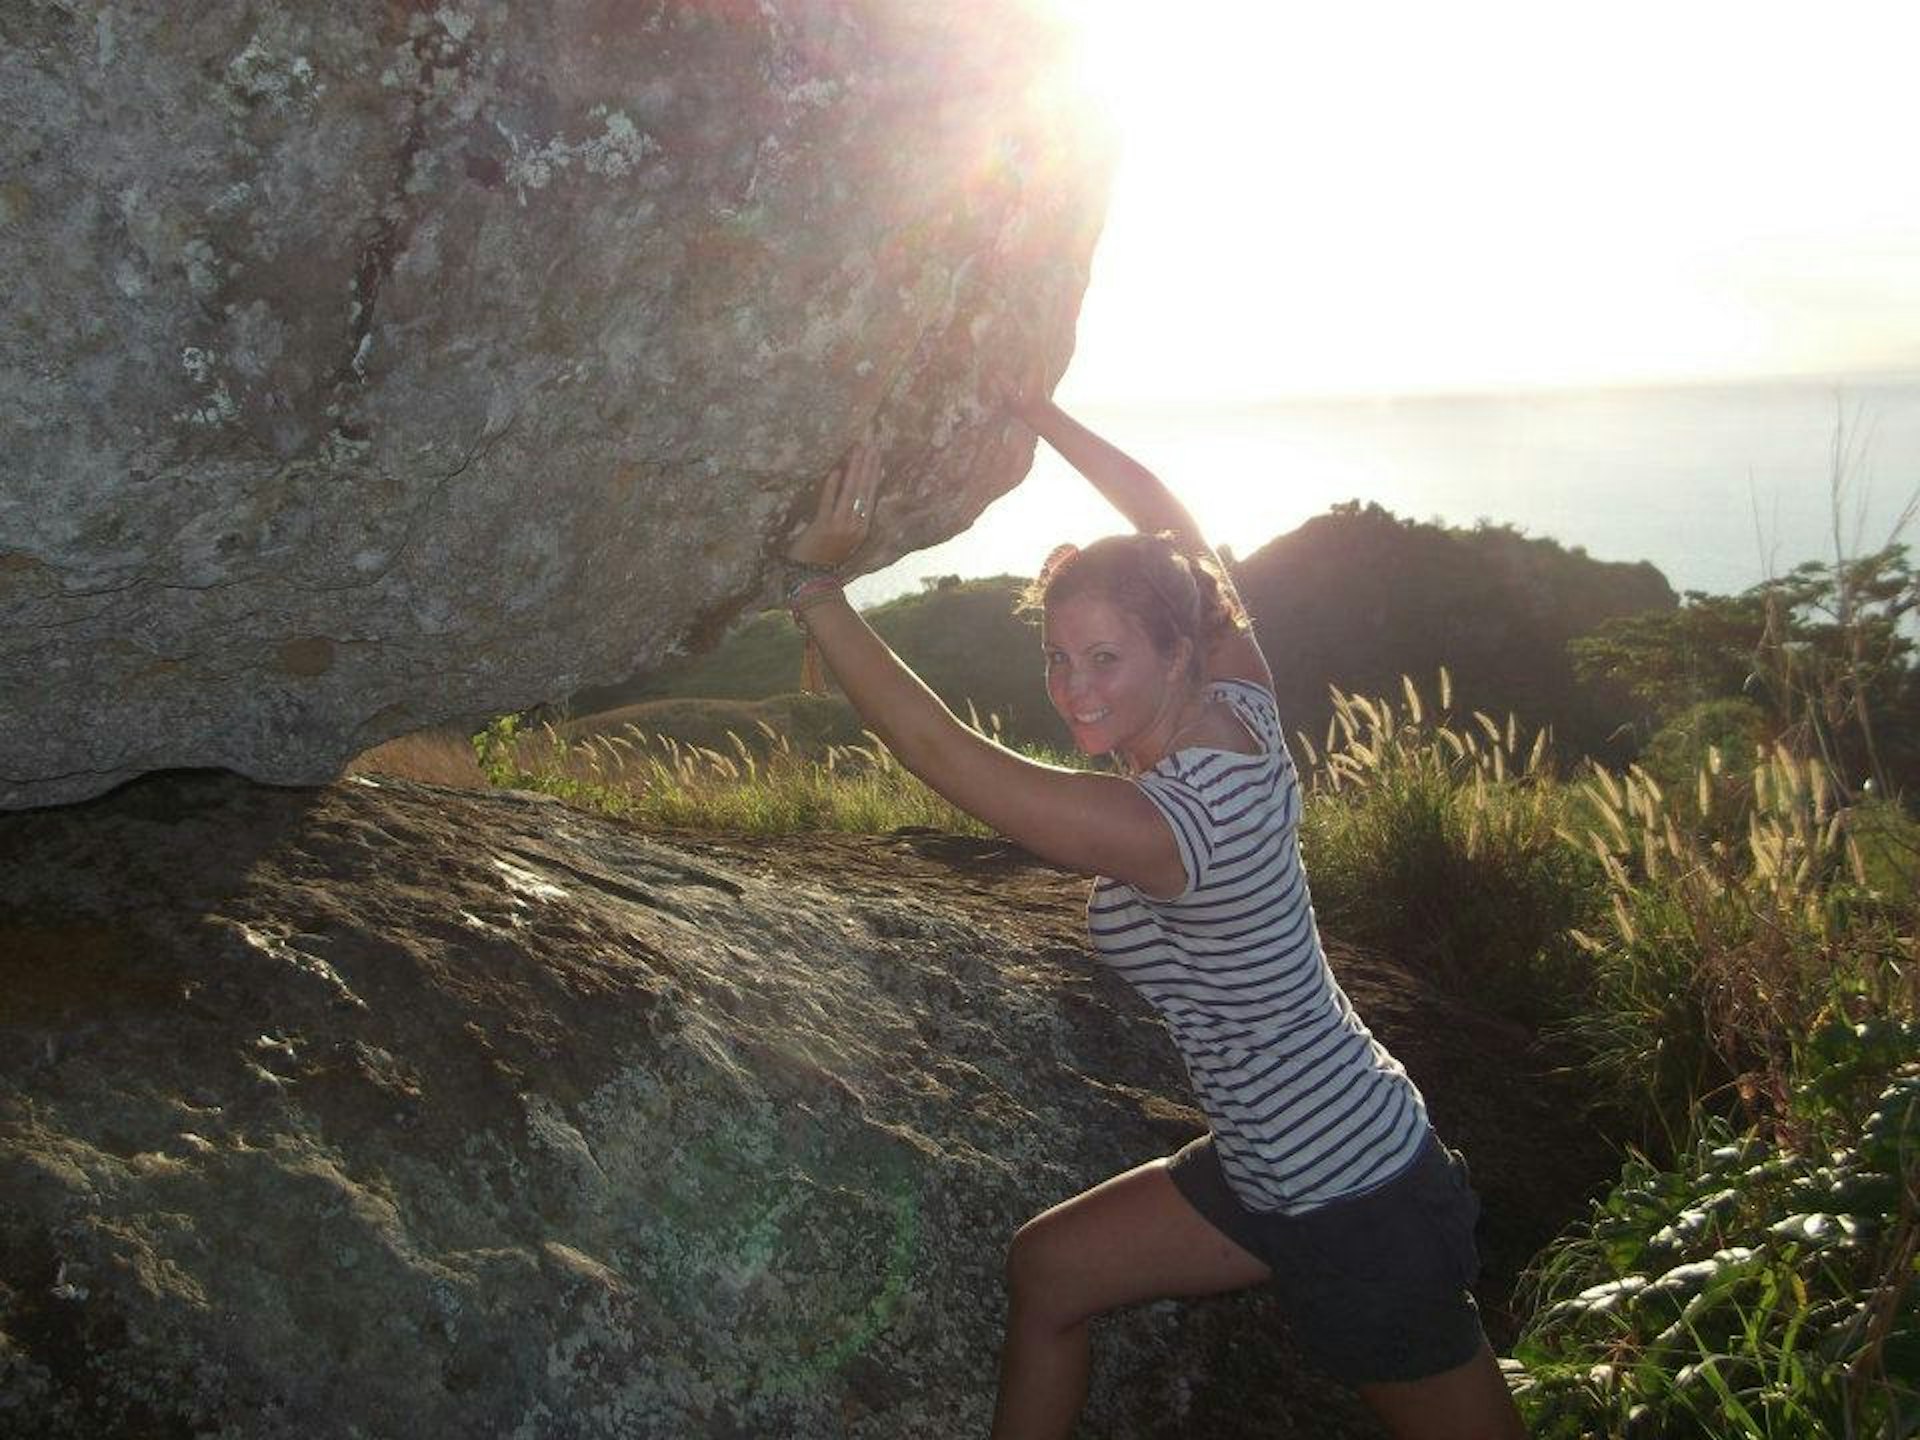 A smiling woman in a striped t-shirt and black shorts pushes against a huge boulder as the sun spills into the top of the frame.